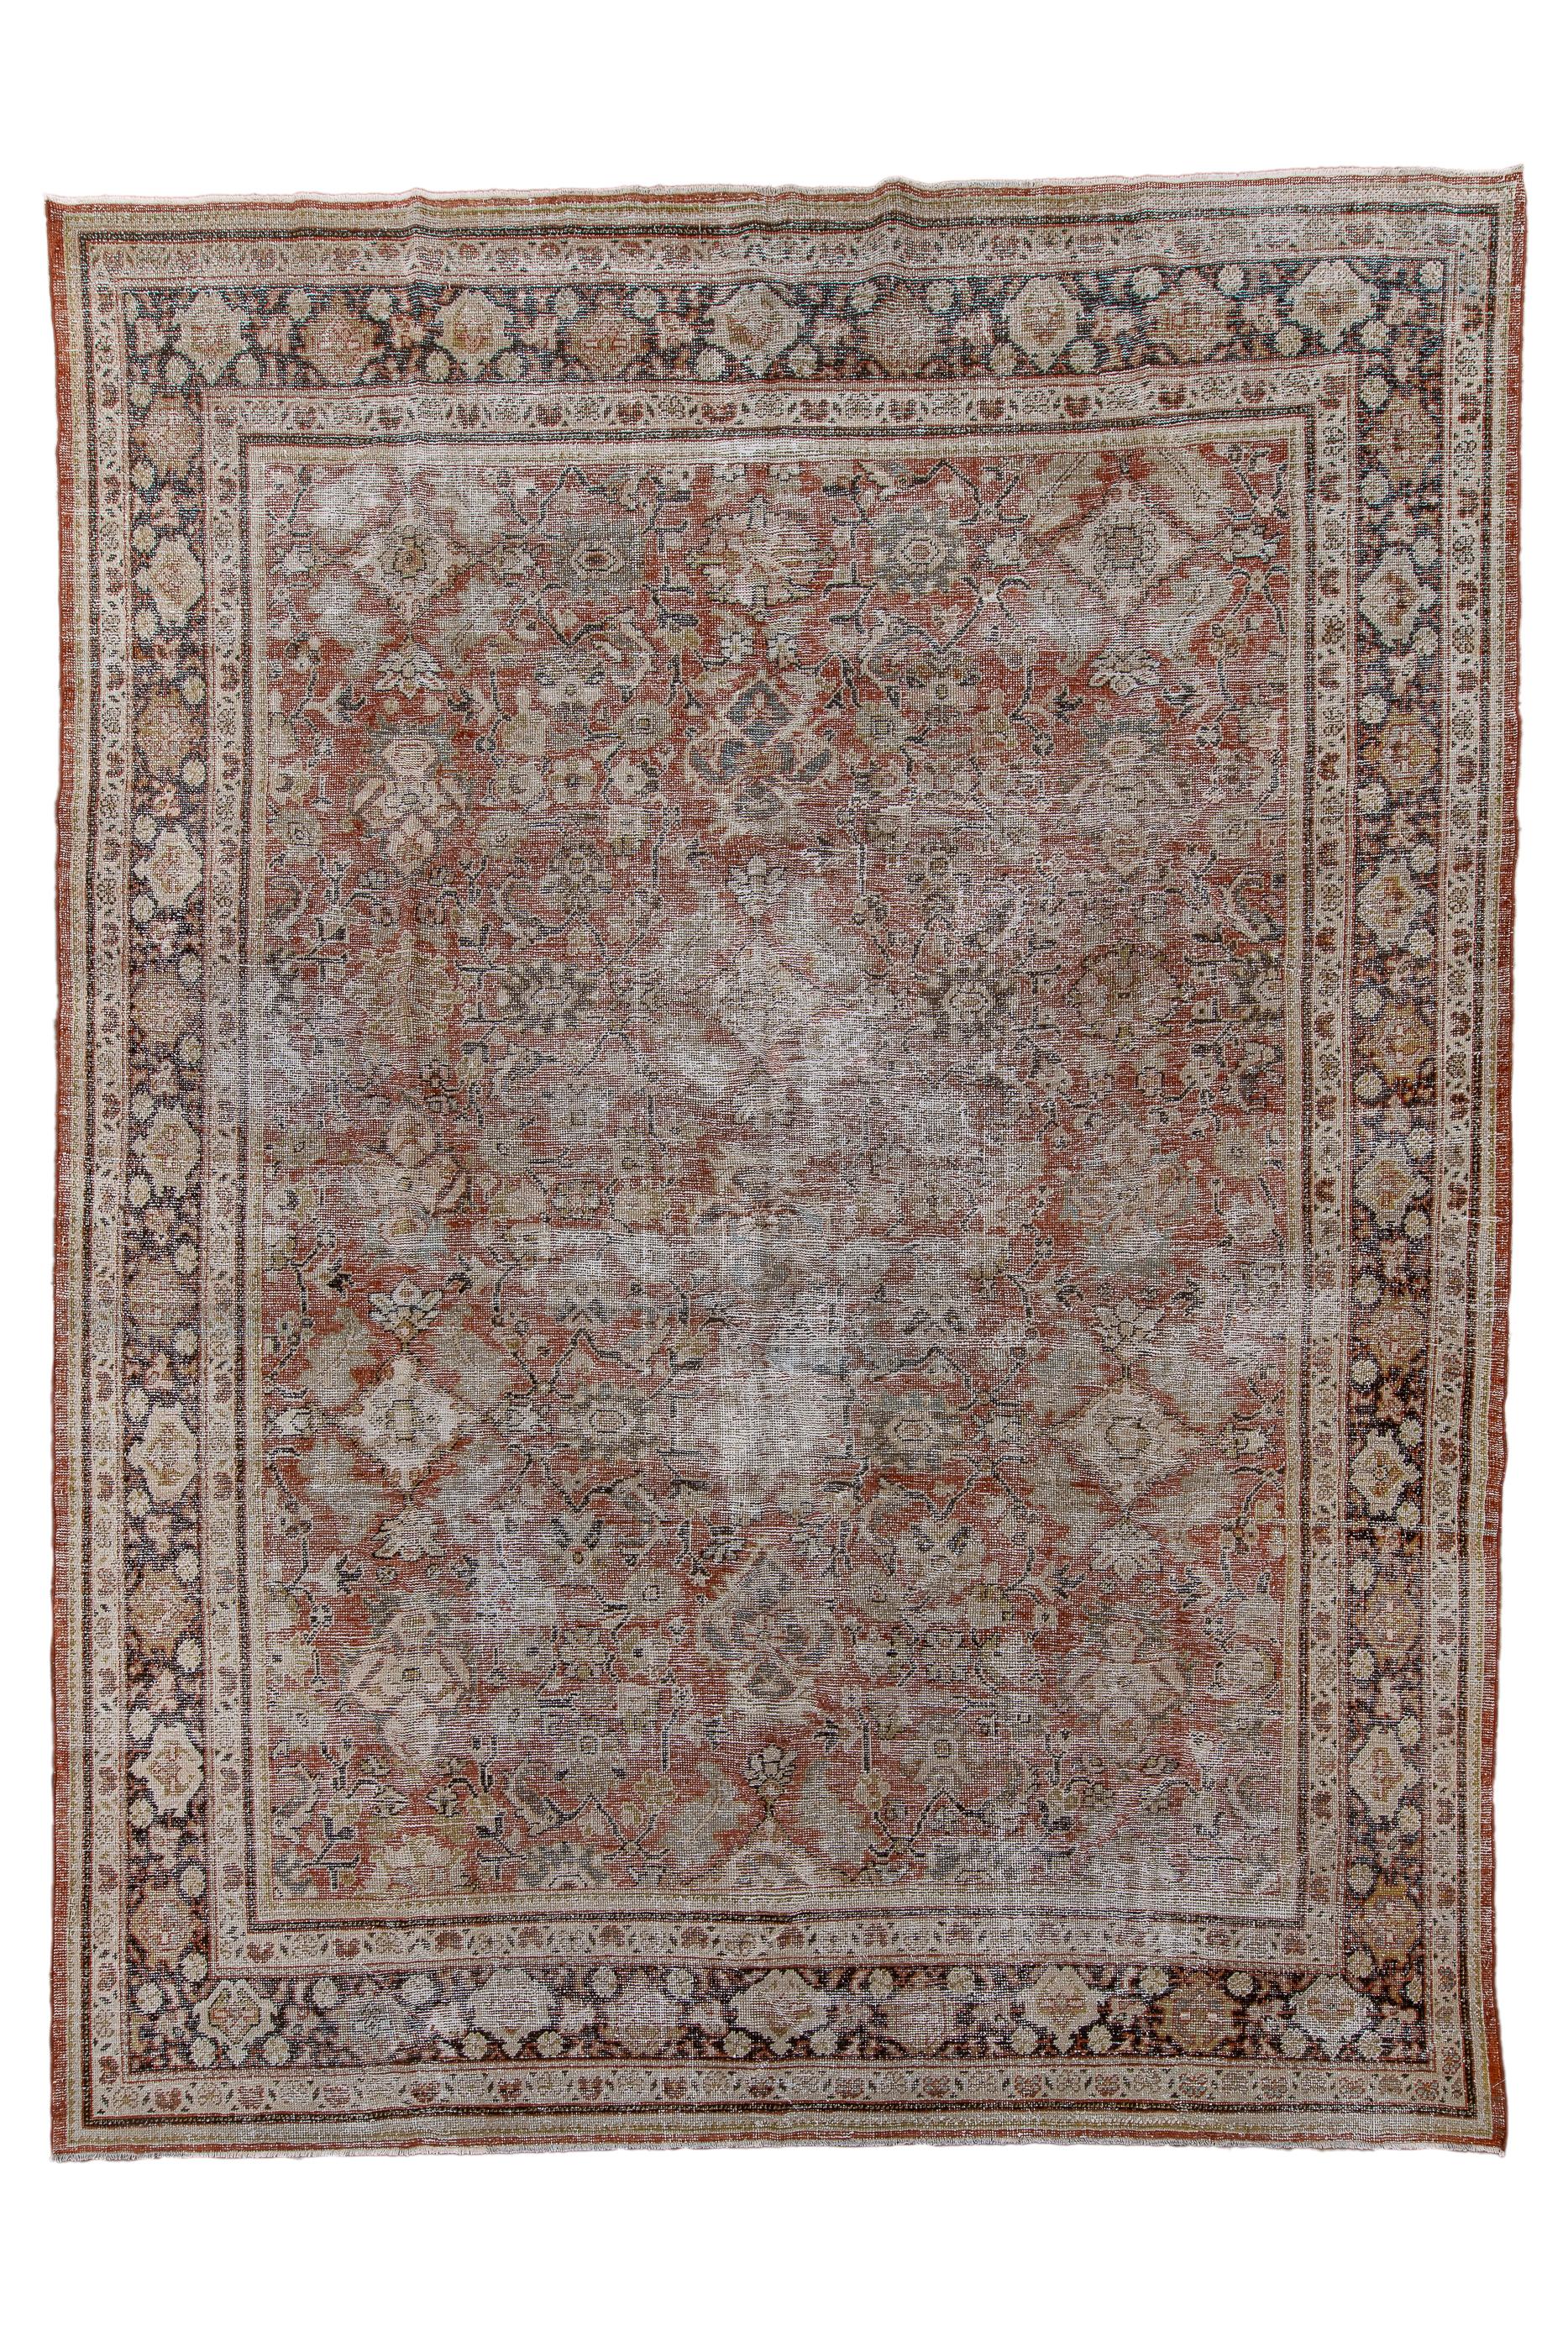 This spot-distressed room size carpet shows a mellow tomato madder field with an allover array of various lozenge-form, quasi-floral elements in shades of cream, straw and  very small bits of dark blue. Chocolate main strip style border with